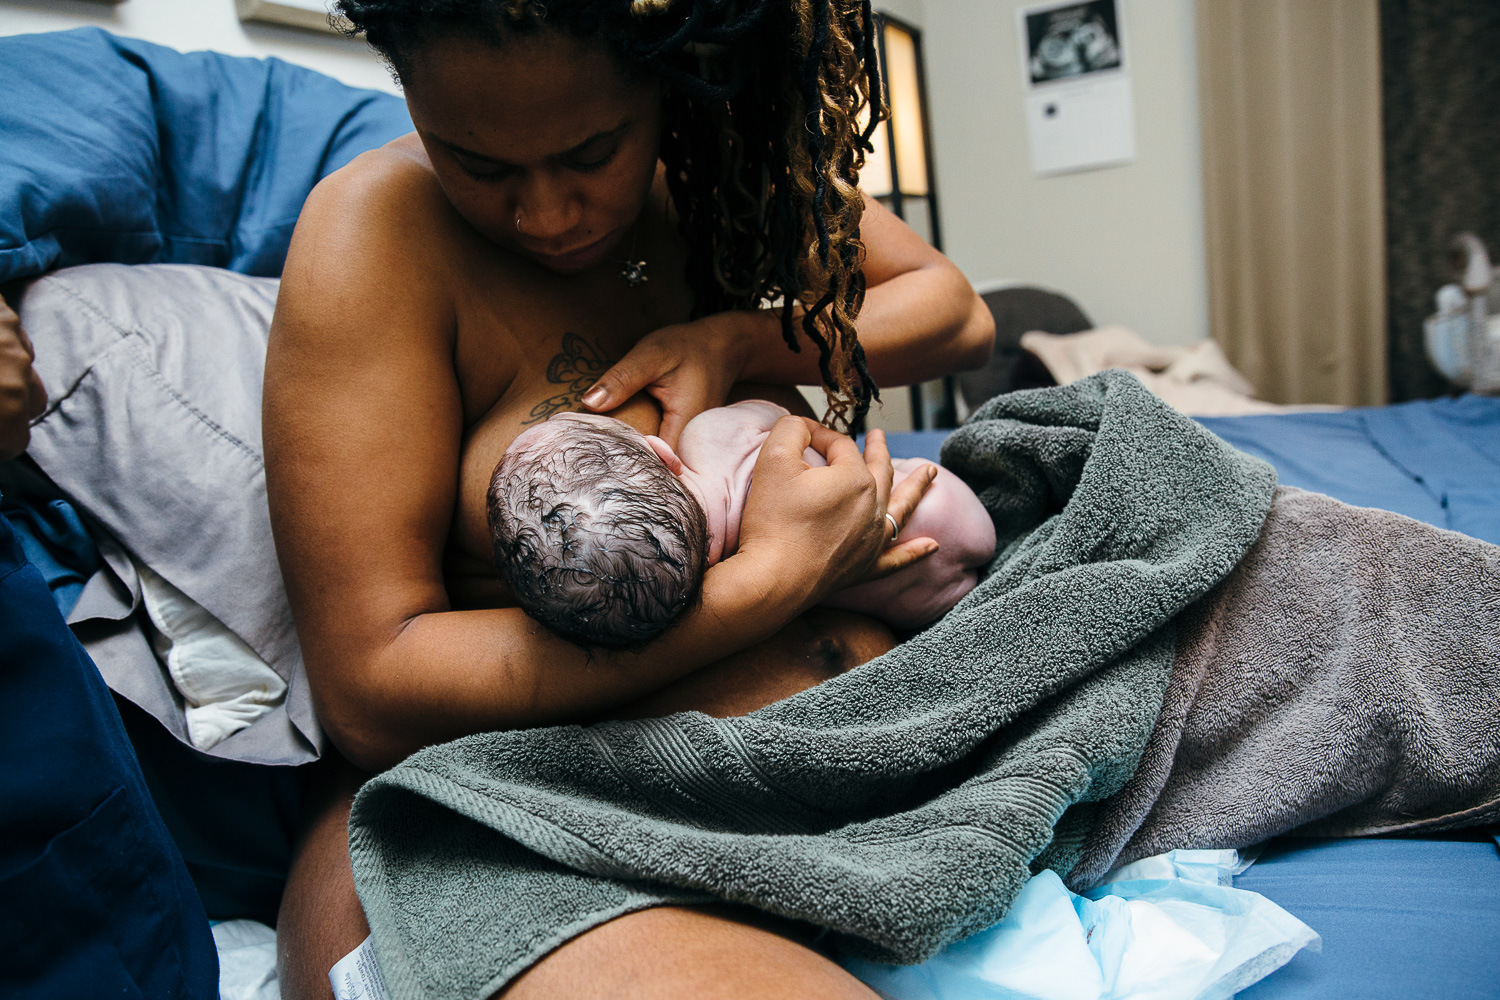 woman of color breastfeeding image